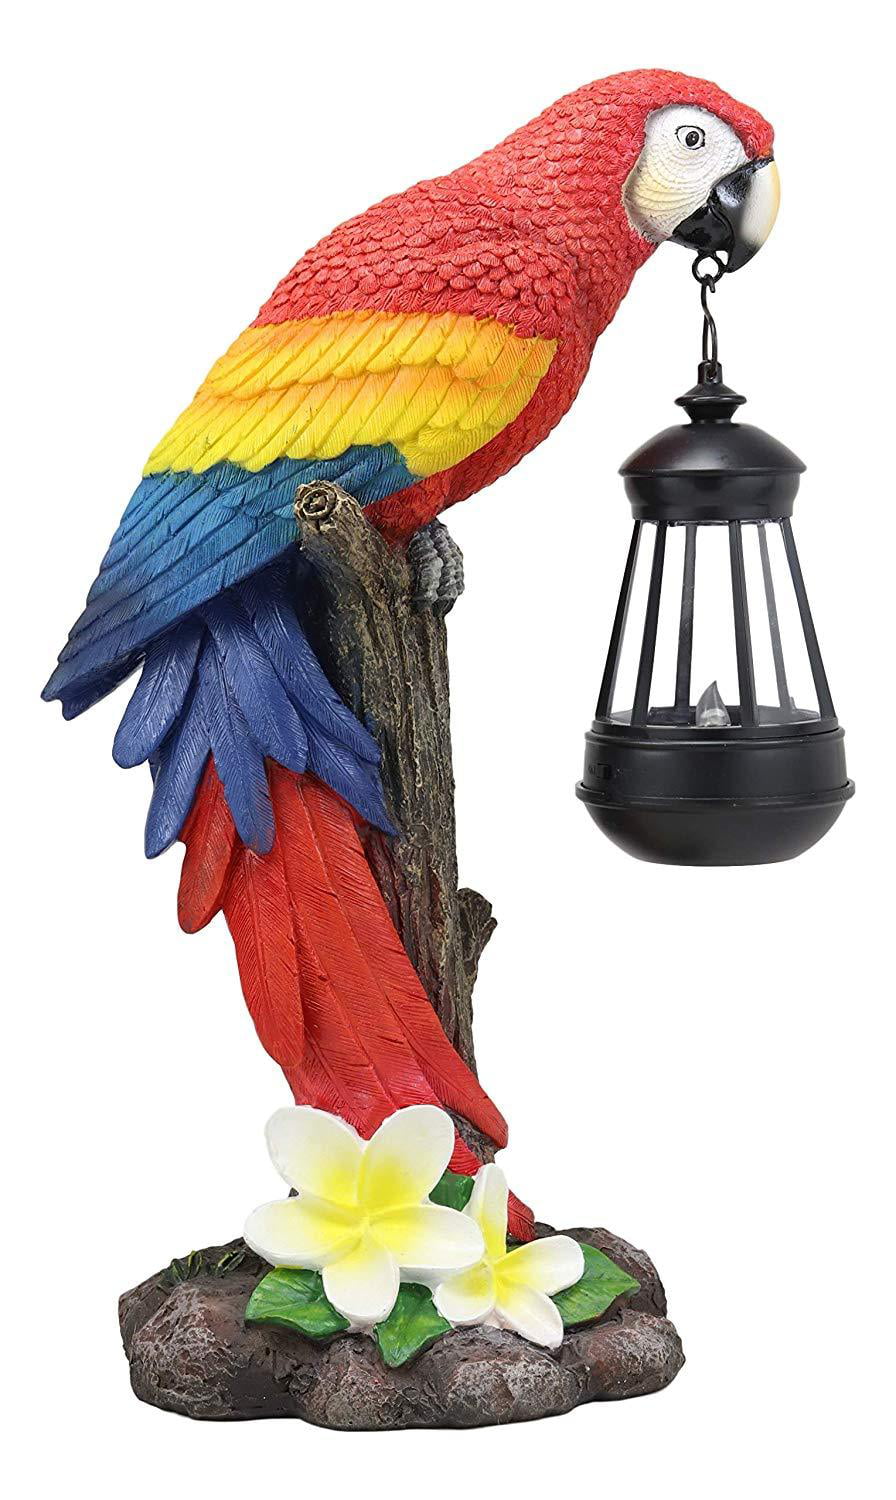 Ebros Gift 14" Tall Bird Red Scarlet Macaw Parrot Statue with Hanging Lantern 